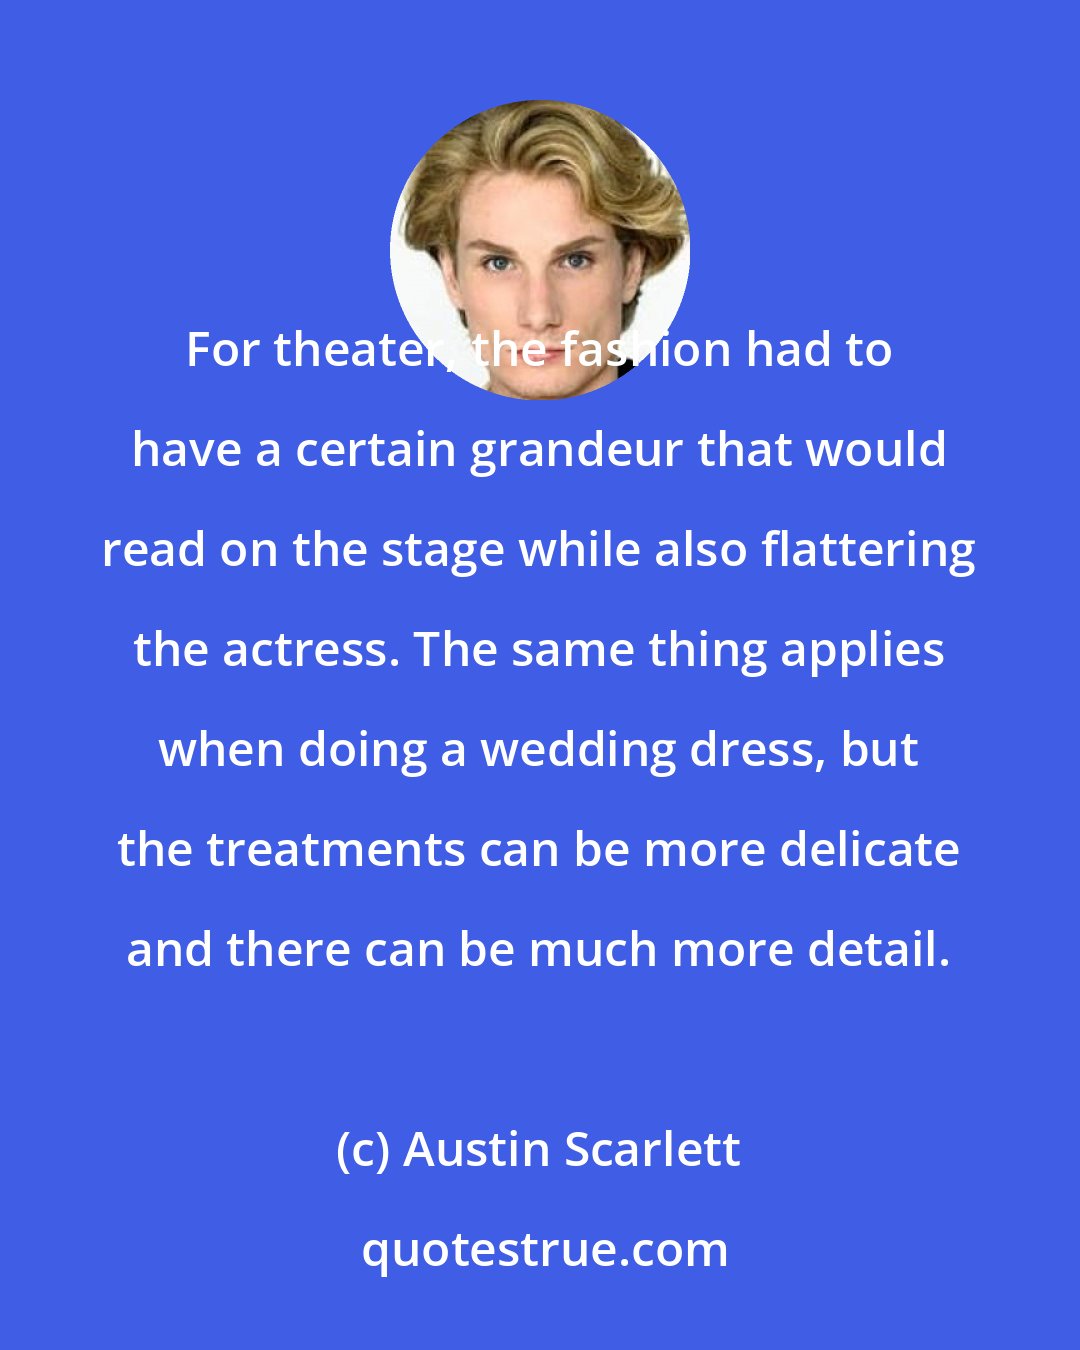 Austin Scarlett: For theater, the fashion had to have a certain grandeur that would read on the stage while also flattering the actress. The same thing applies when doing a wedding dress, but the treatments can be more delicate and there can be much more detail.